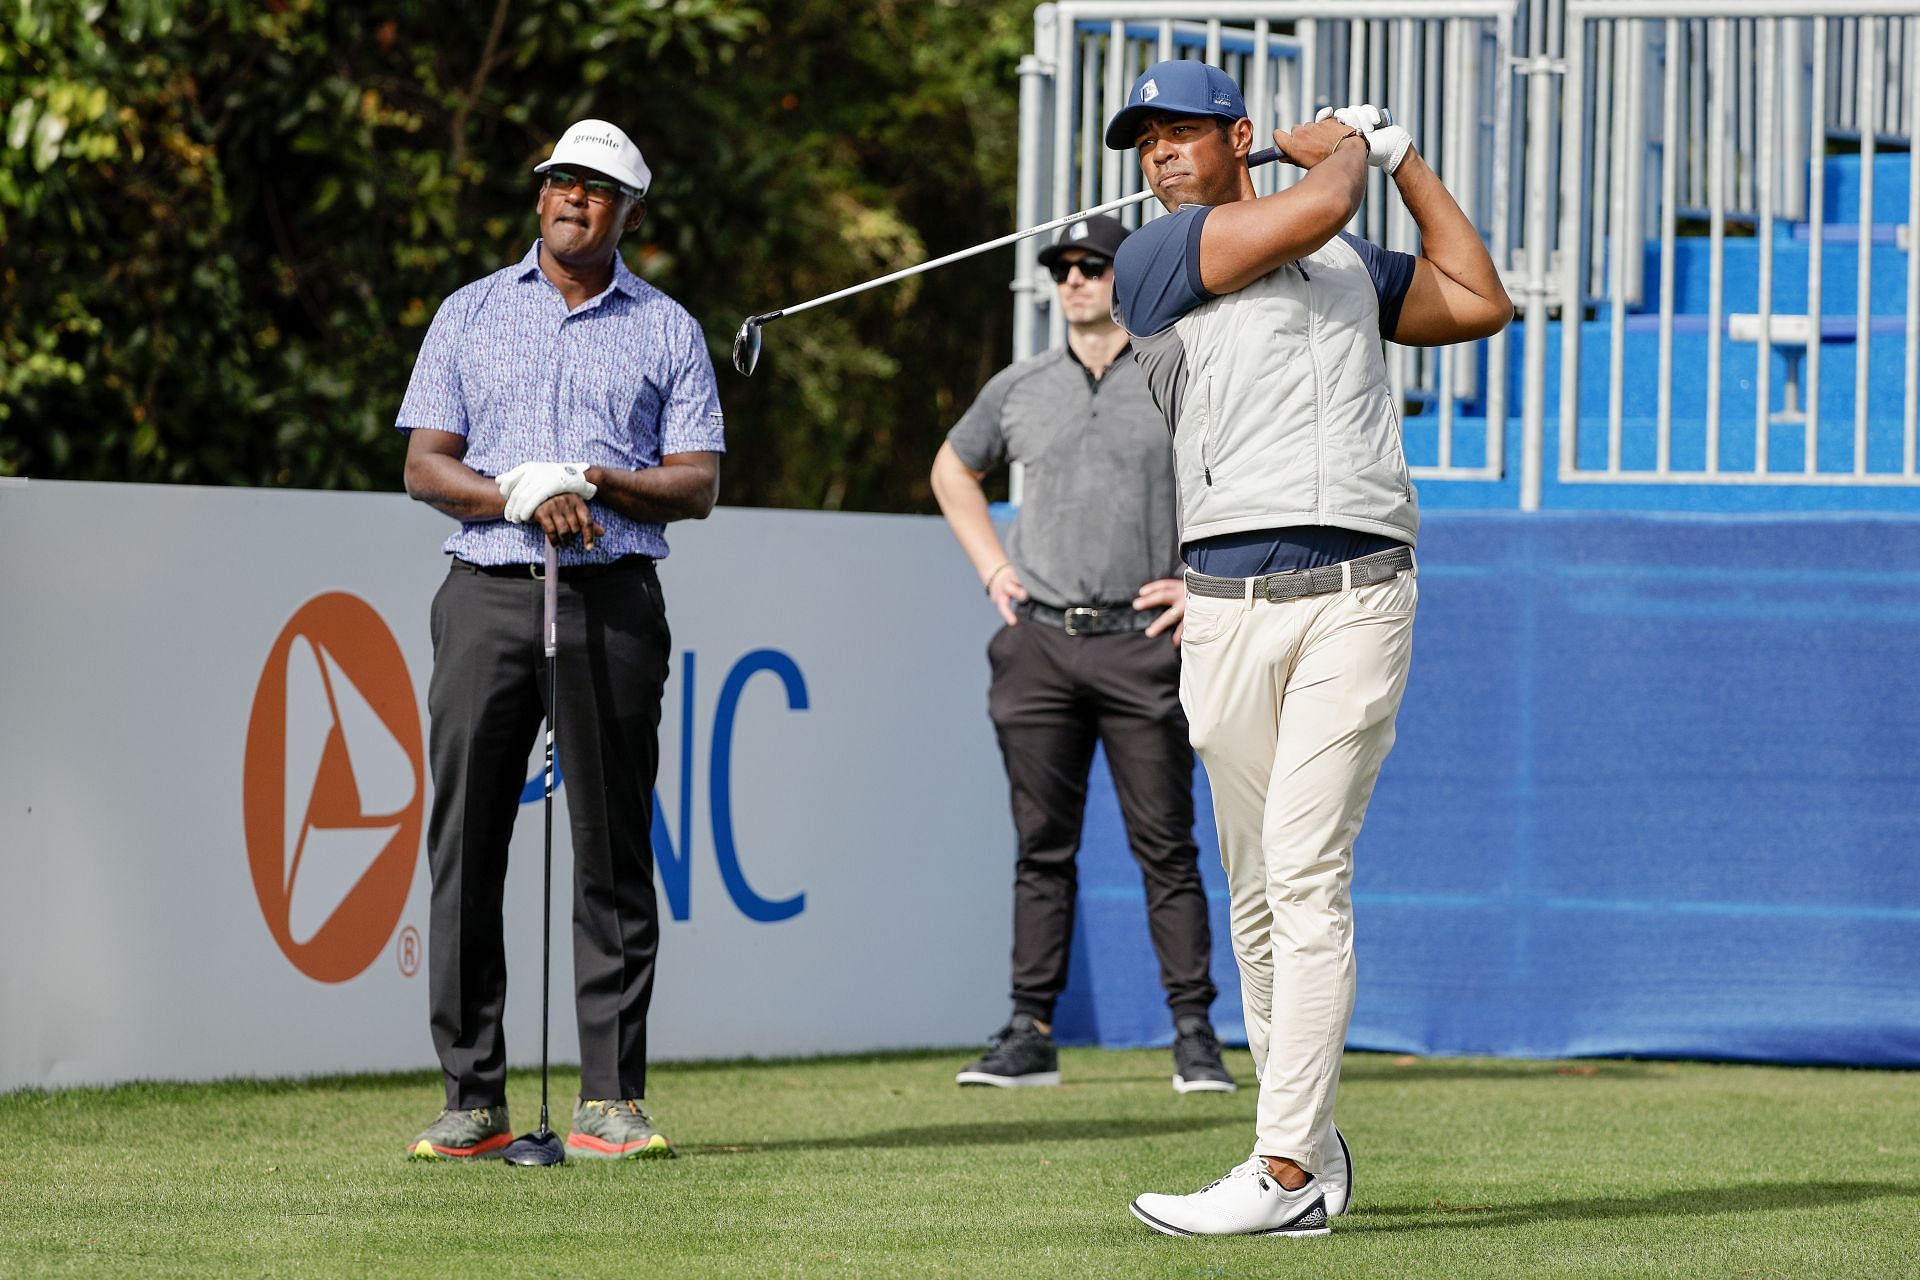 5 famous fatherson duos in golf feat. Tiger and Charlie Woods and more